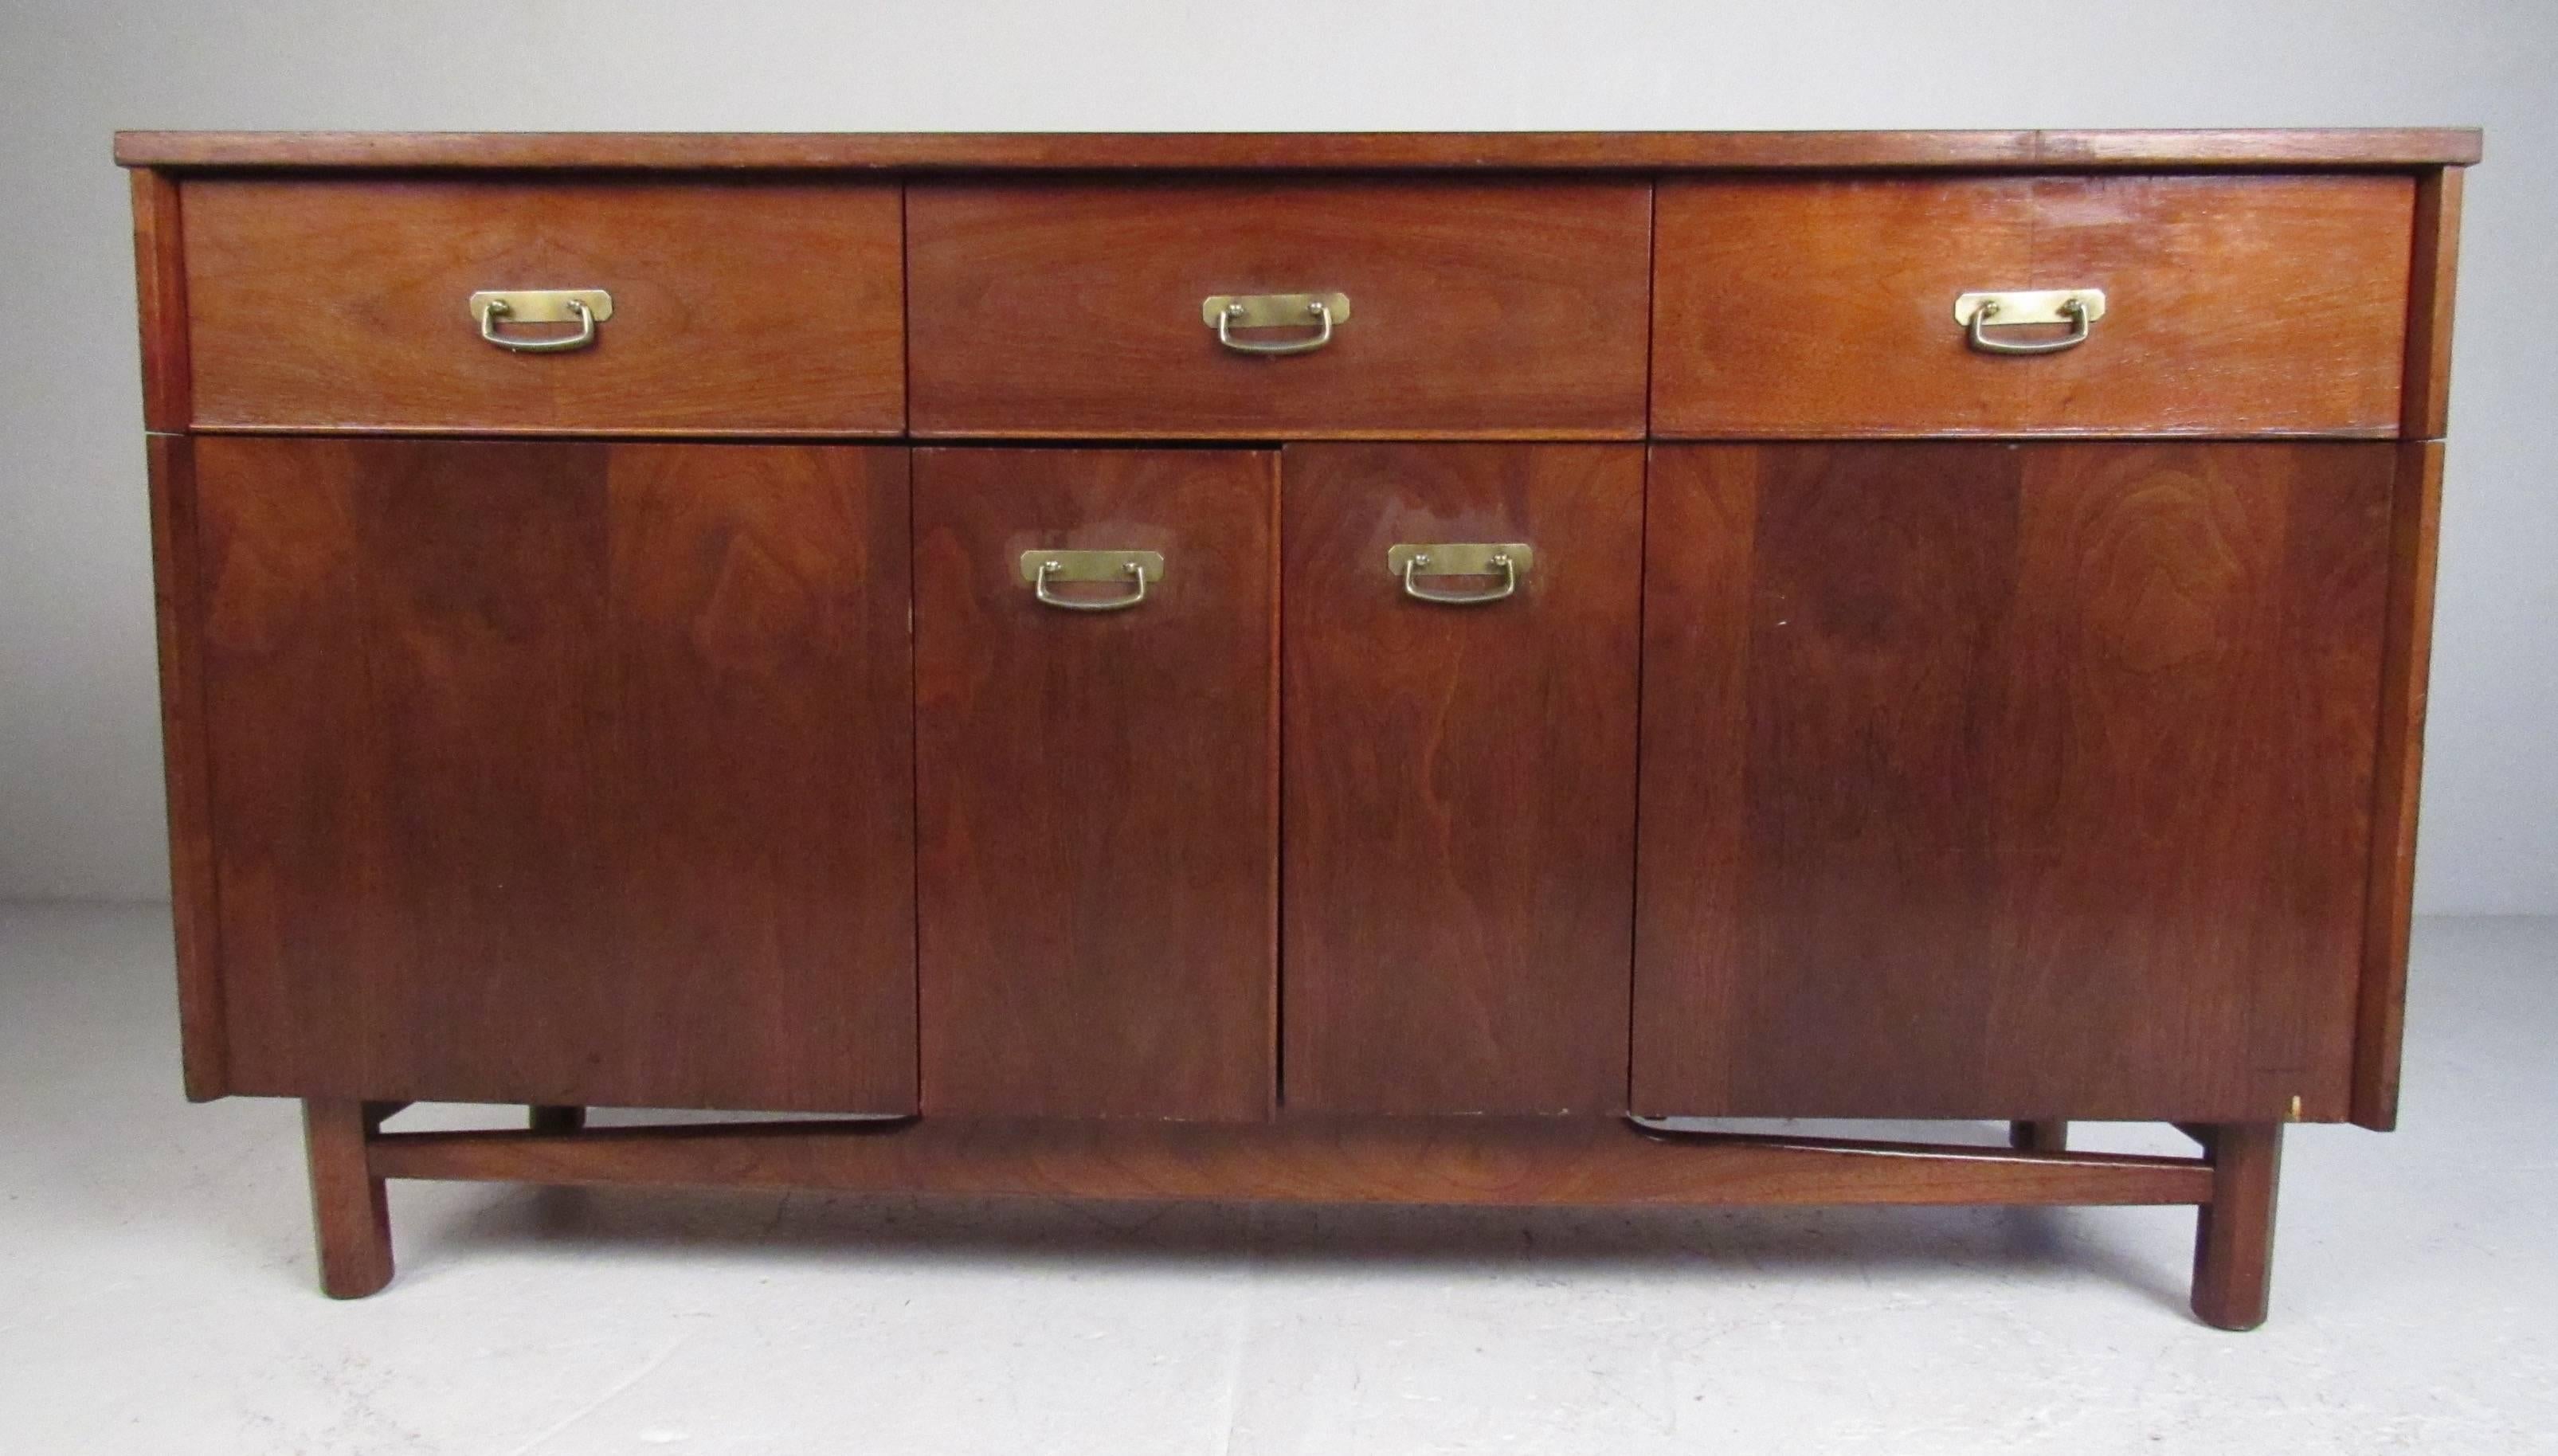 Mid-Century Modern walnut credenza/buffet with durable laminate top, three top drawers and two bi-fold doors with shelf storage. A beautiful example of the high quality work from Young Manufacturing Company, built in Kentucky. Please confirm item